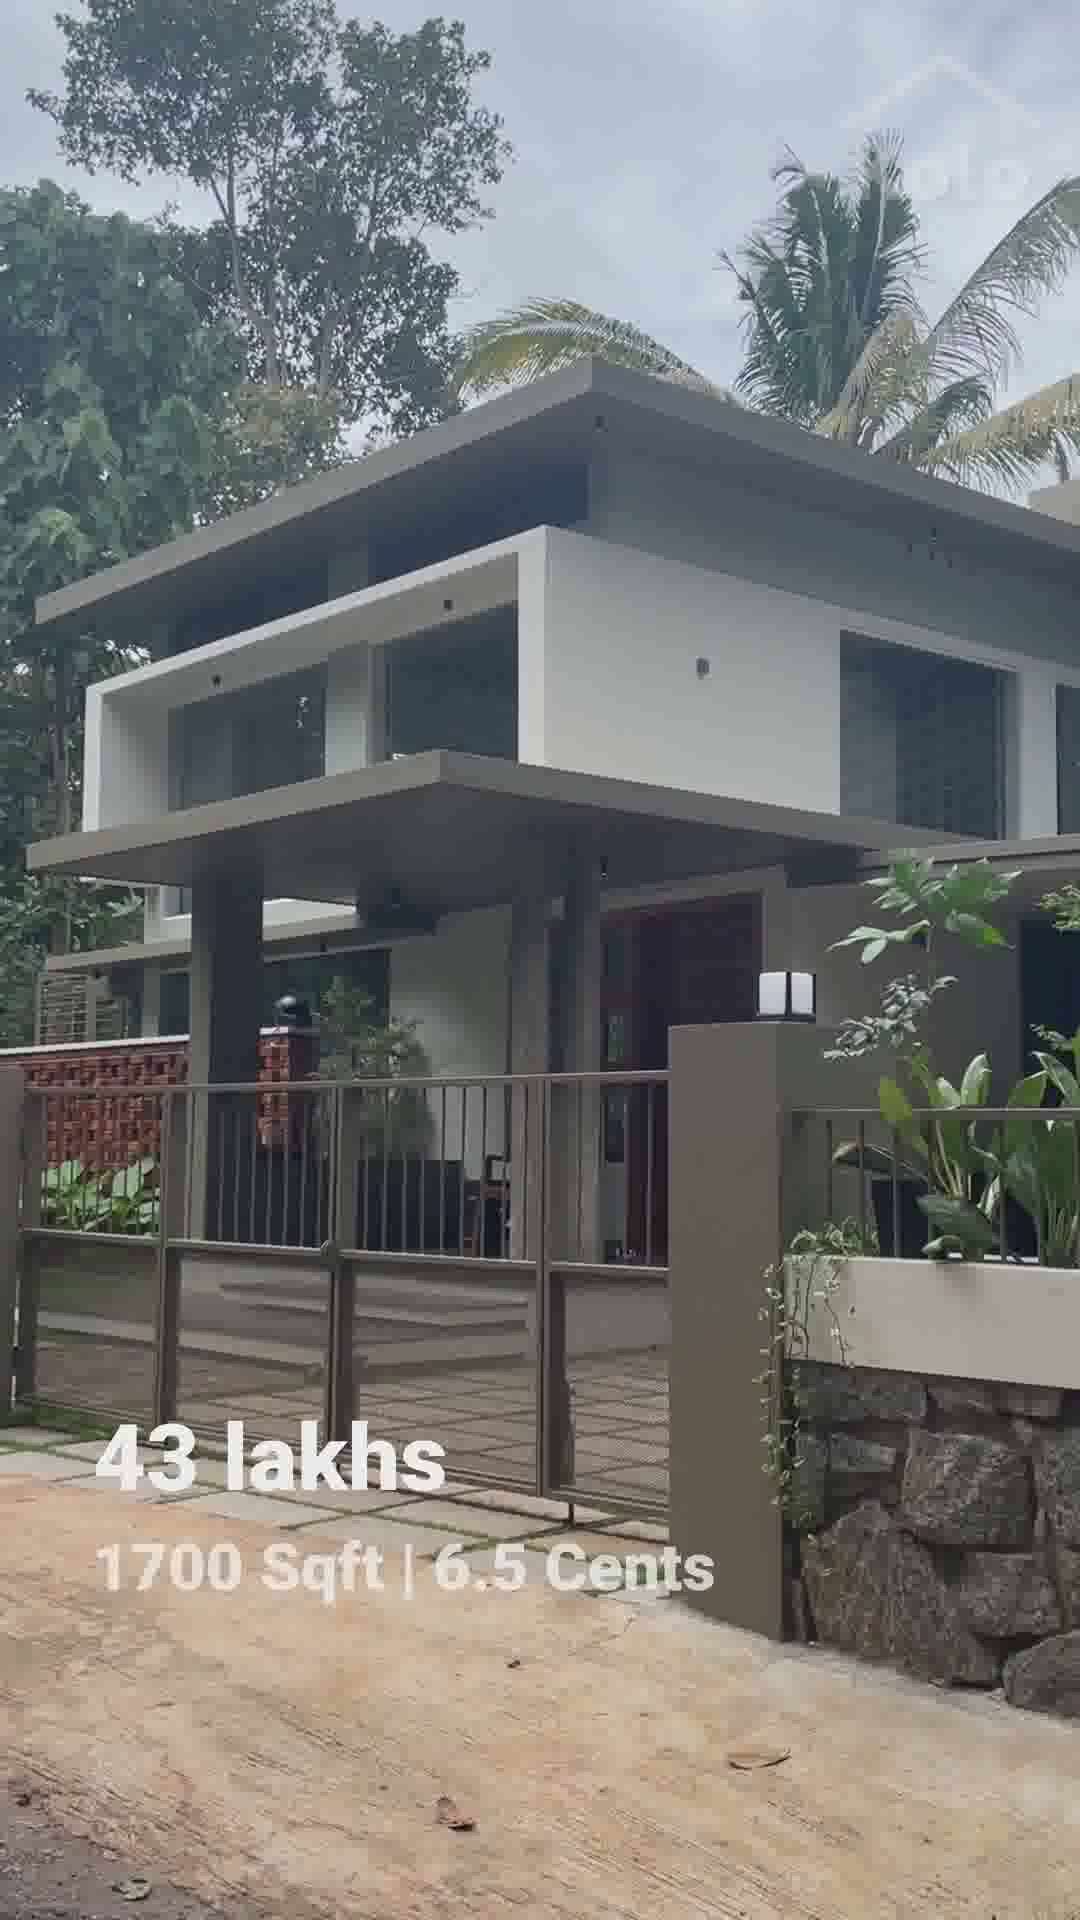 43 lakhs | 1700 Sqft | Trivandrum

Client name: Jibin V Eapen
Location: Amboori, Trivandrum

Budget: 43 lakhs including interior and landscape
Sqft: 1700
Plot area: 6.5 cents
3bhk, balcony, mezzonine floor, work area

Name: Ar. Anu D Sabin
@almost_parallel
Firm name: Studio Connect
@Studioconnect
Location: Kottarakara
Contact number: 9074720479

Photographer: @Almost_parallel

Kolo - India’s Largest Home Construction Community :house:

#home #keralahouse #koloapp #keralagram #reelitfeelit #keralagodsowncountry #homedecor #enteveedu #homedesign #keralahomedesignz #keralavibes #instagood #interiordesign #interior #interiordesigner #homedecoration #homedesign #homedesignideas #keralahomes #homedecor #homes #homestyling #traditional #kerala #homesweethome #architecturedesign #architecture #keralaarchitecture #architecture